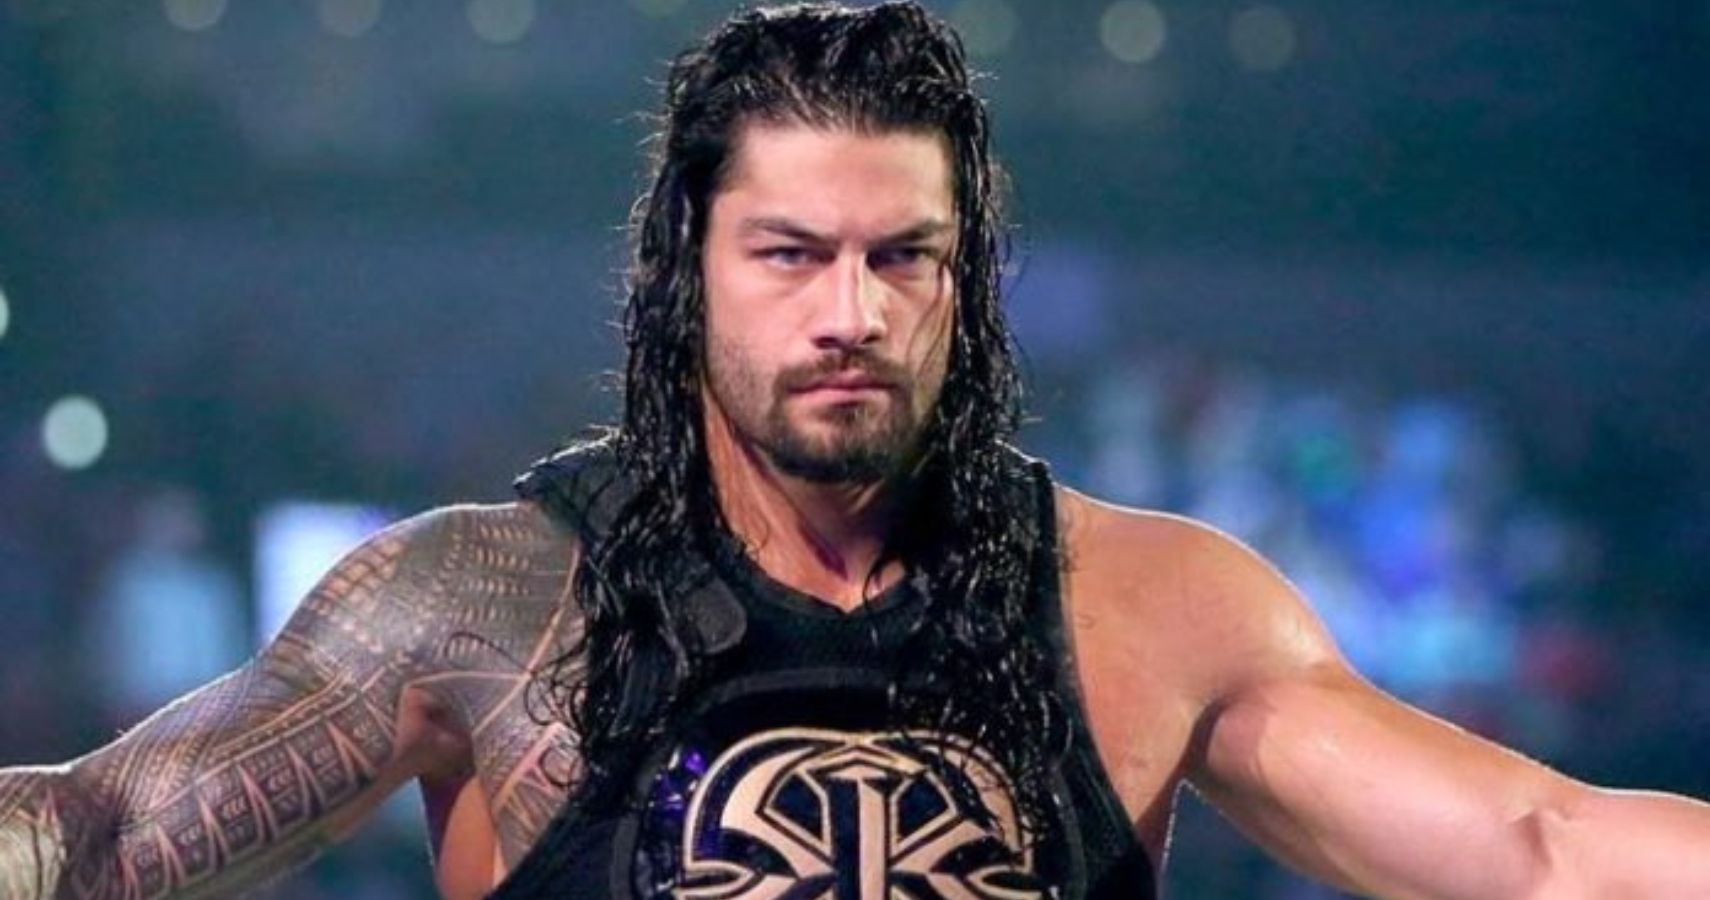 WWE Roman Reigns body transformation from debut is seriously impressive